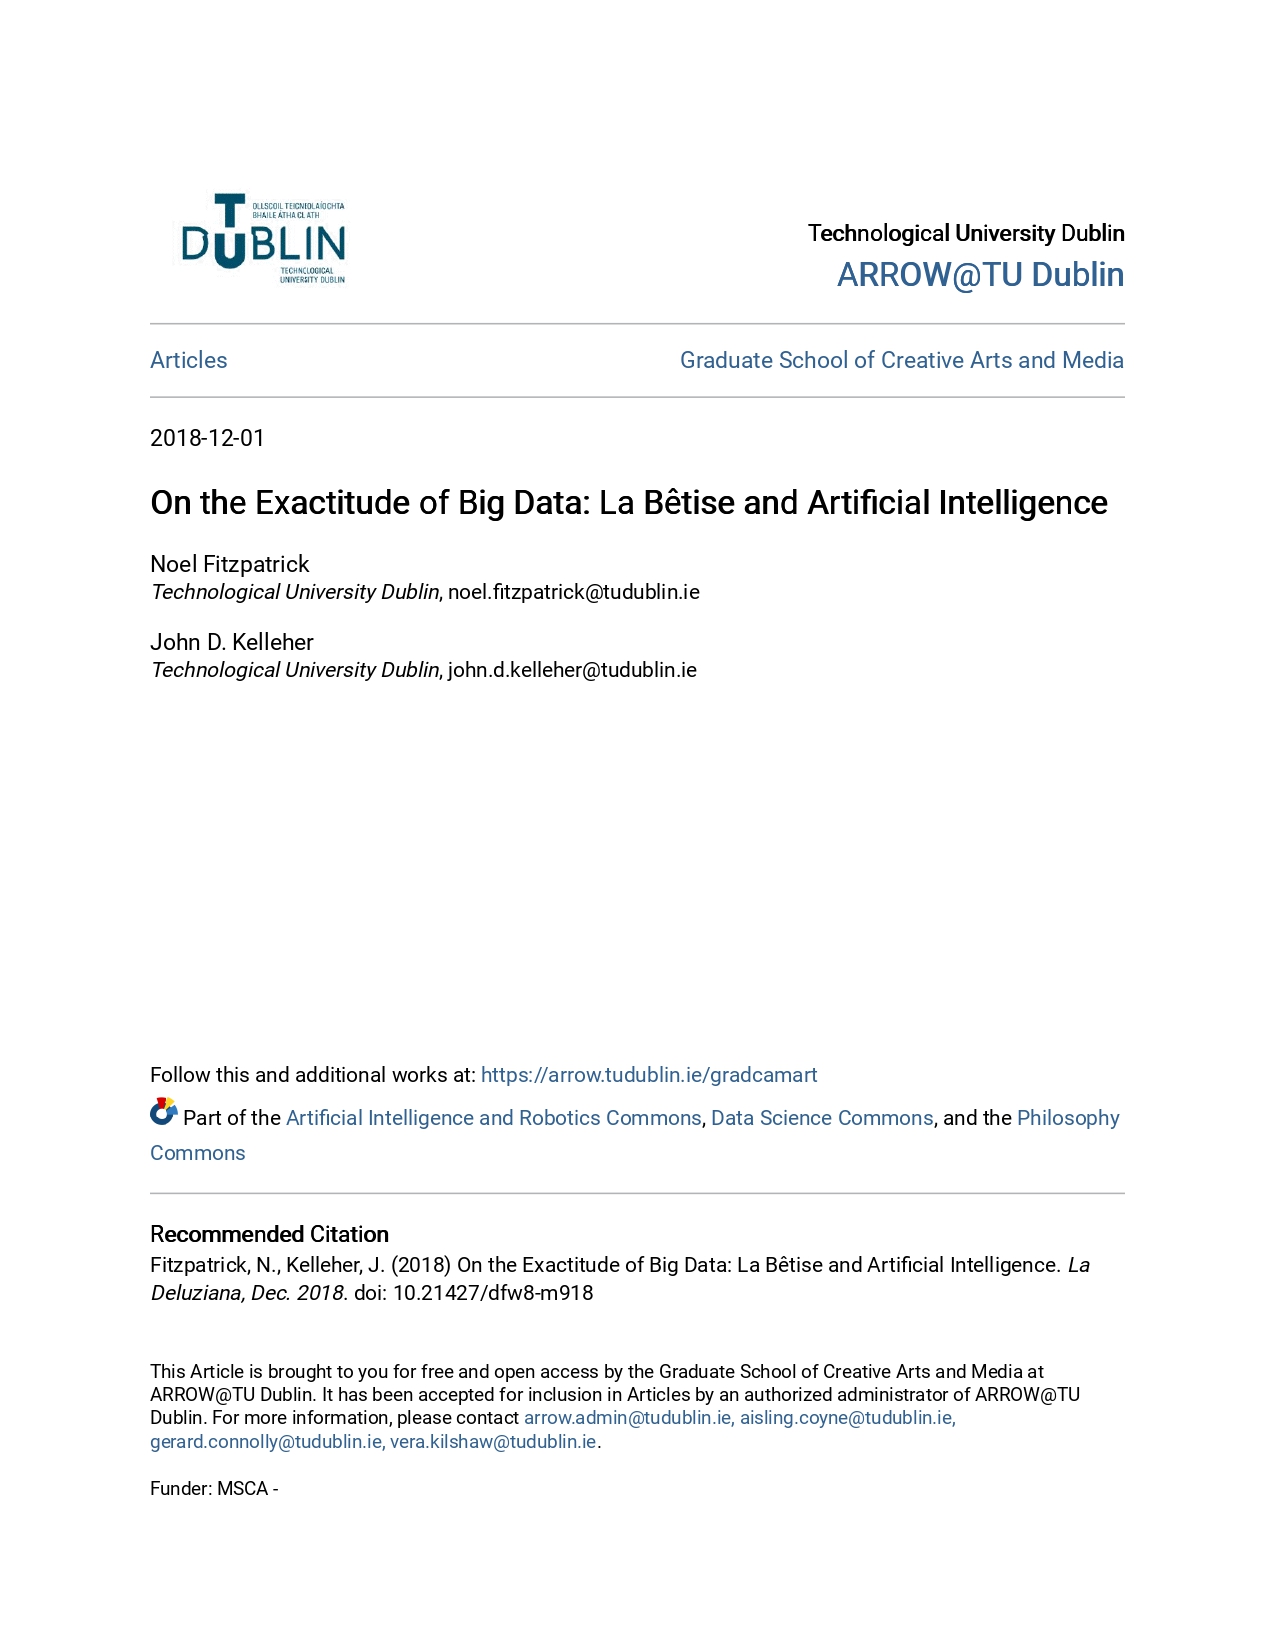 On the Exactitude of Big Data: La Bêtise and Artificial Intelligence